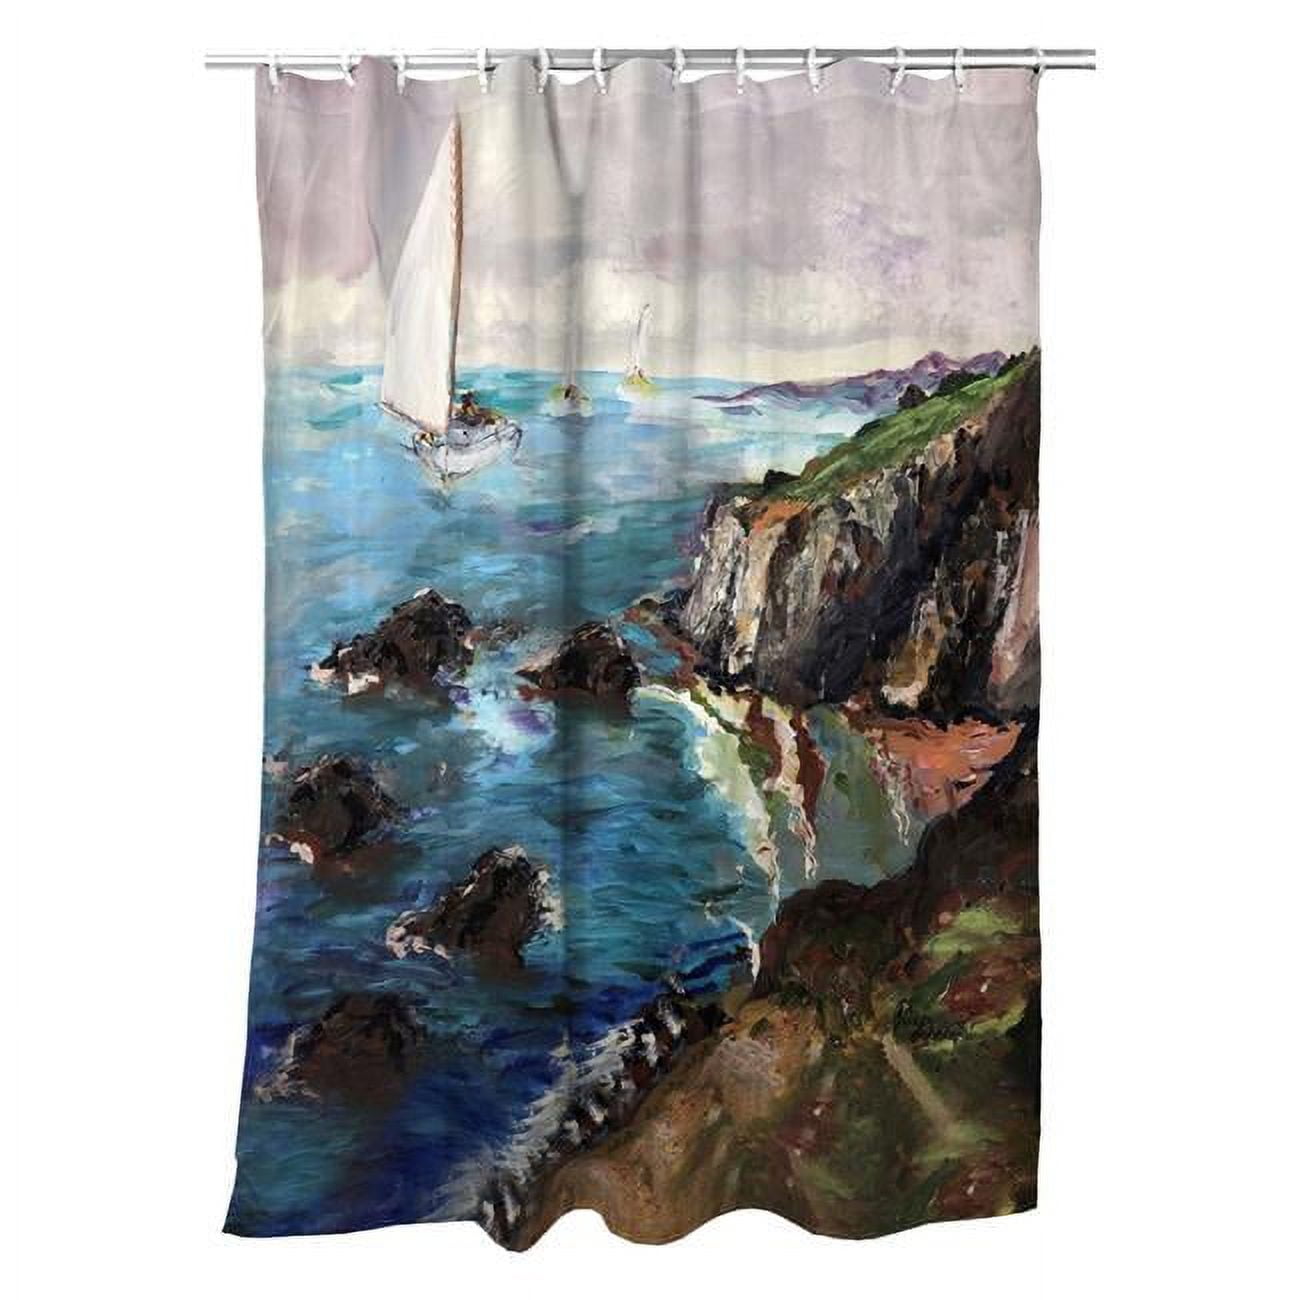 Picture of Betsydrake SH1164 71 x 74 in. Sailing the Cliffs Shower Curtain